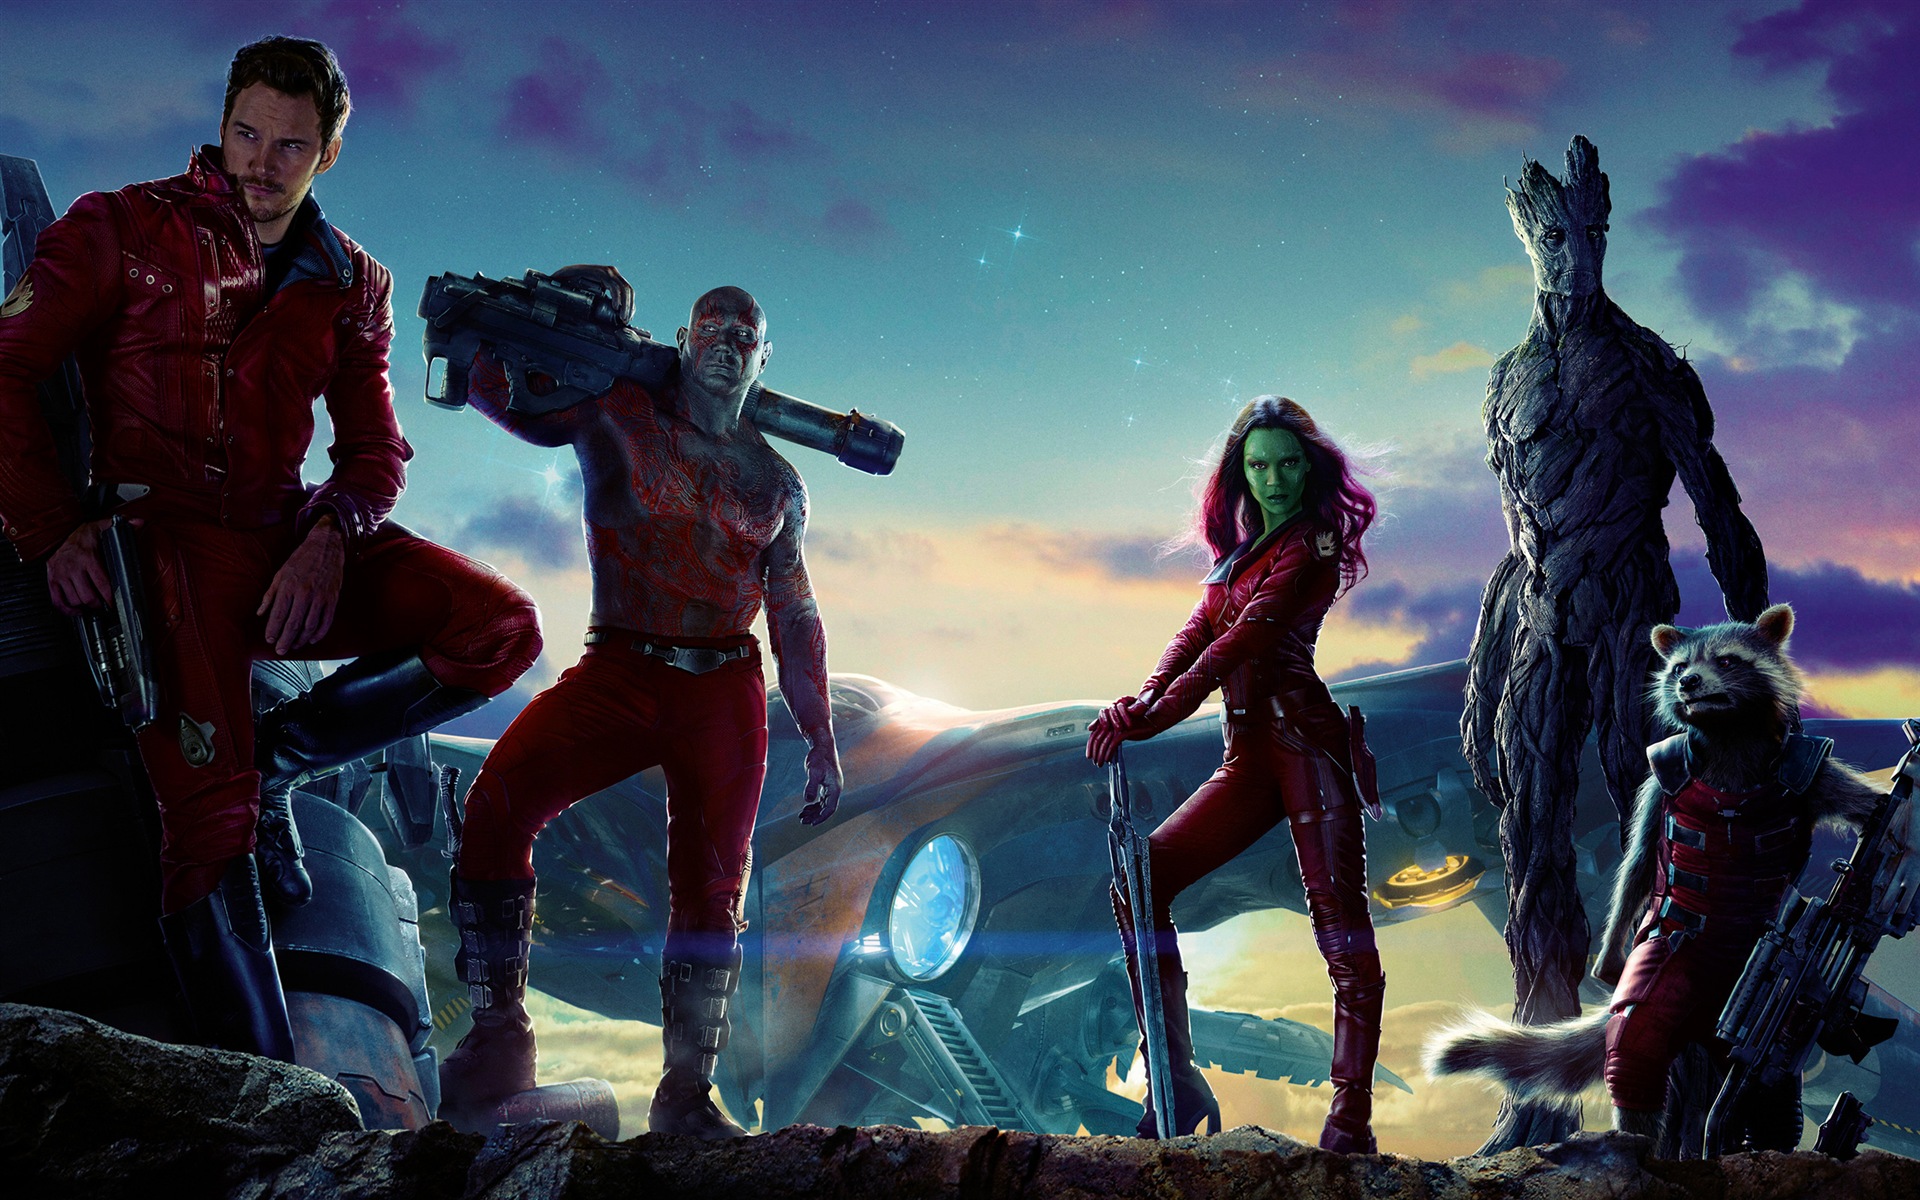 Guardians of the Galaxy 2014 HD movie wallpapers #4 - 1920x1200